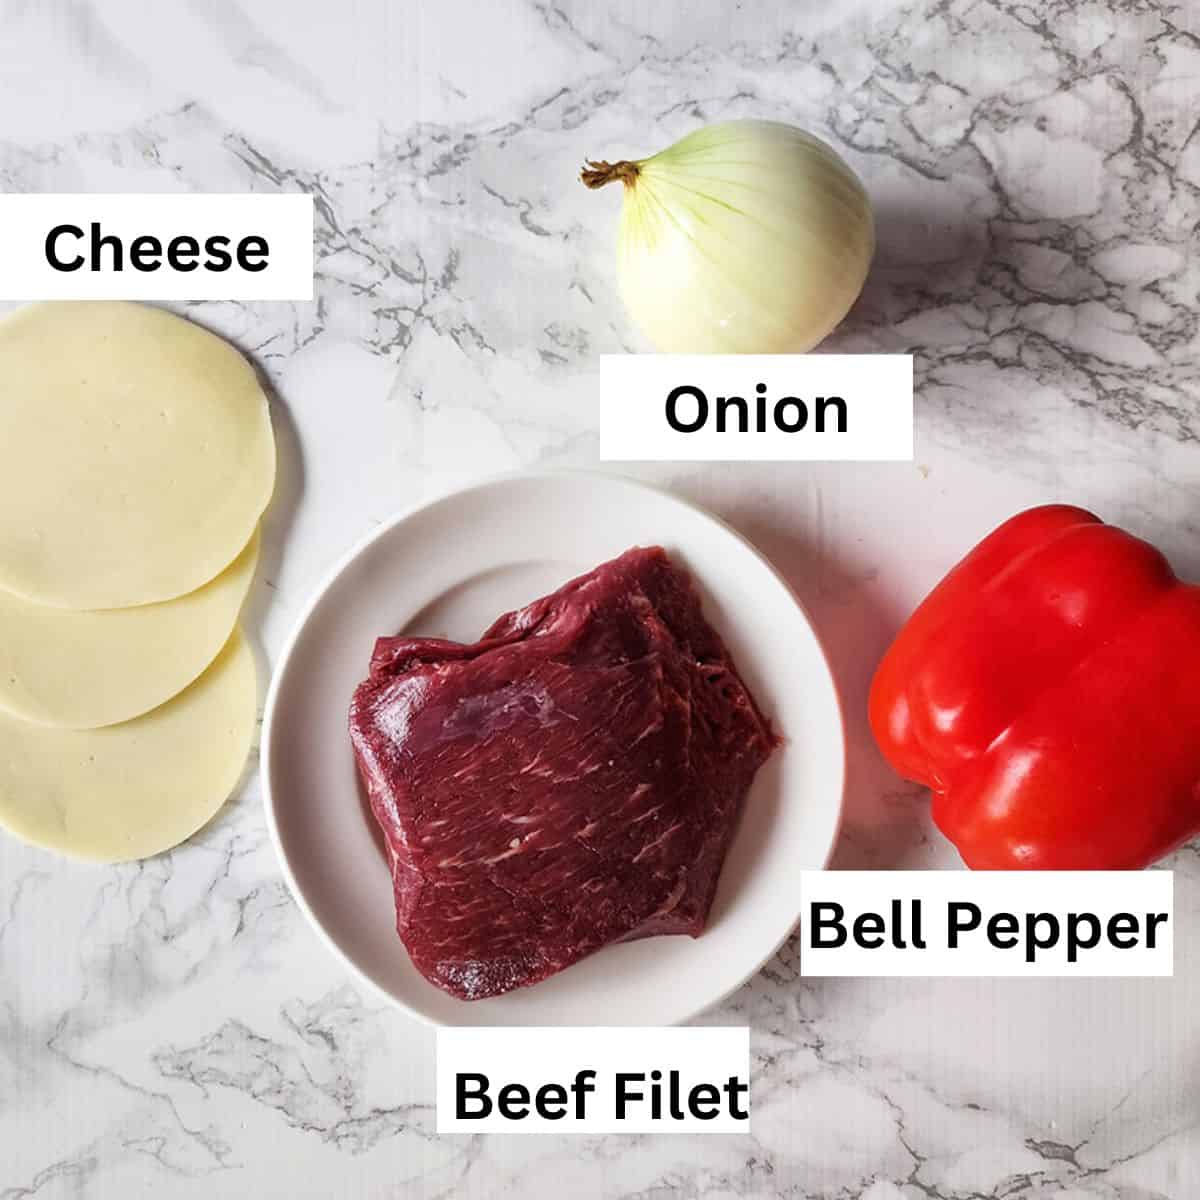 a picture of the ingredients needed to make a beef filet sandwich